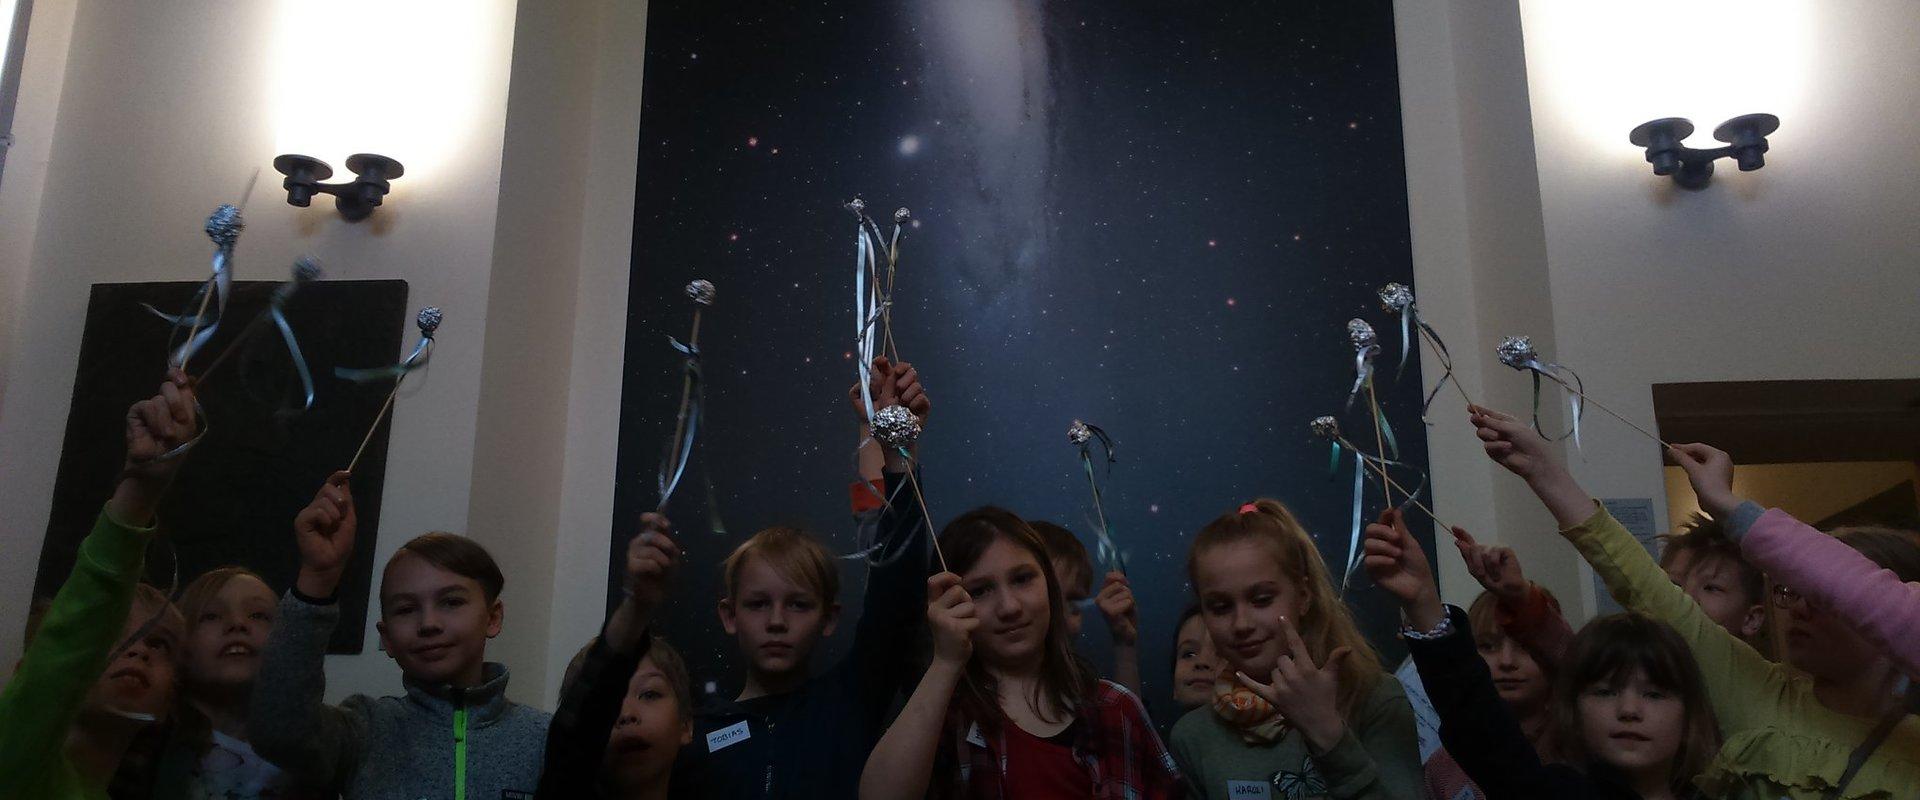 Tartu Old Observatory, children with self-made comets